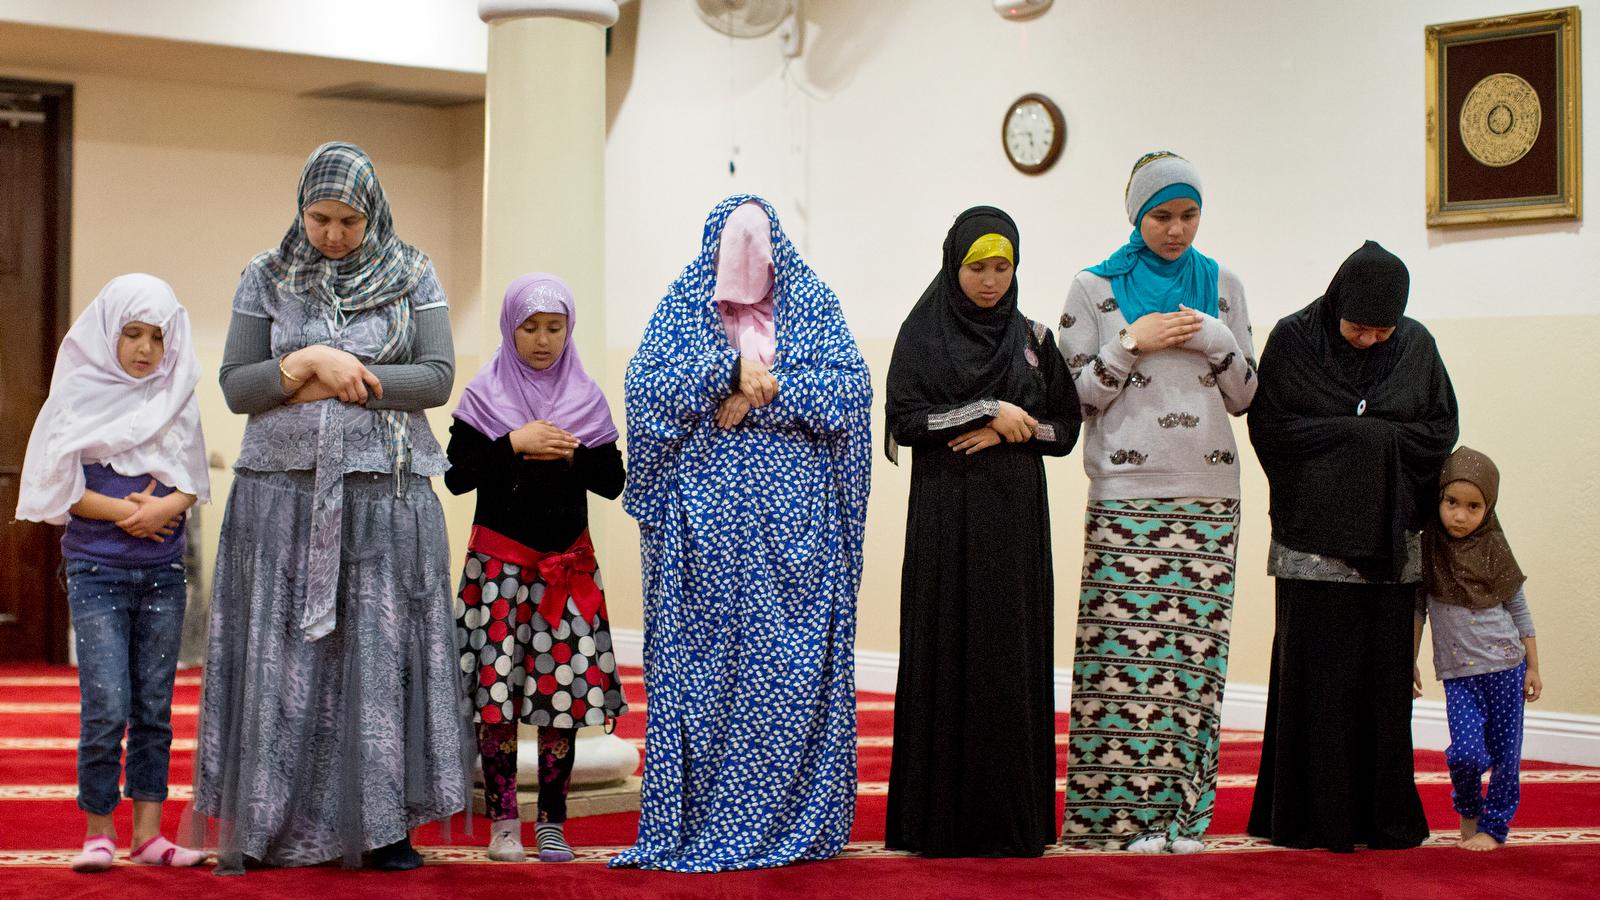 Women take part in the Maghrib prayer just after sunset at 5:34 p.m. at West Coast Islamic Society in Anaheim on Feb. 12. The prayer is the fourth of five daily prayers.